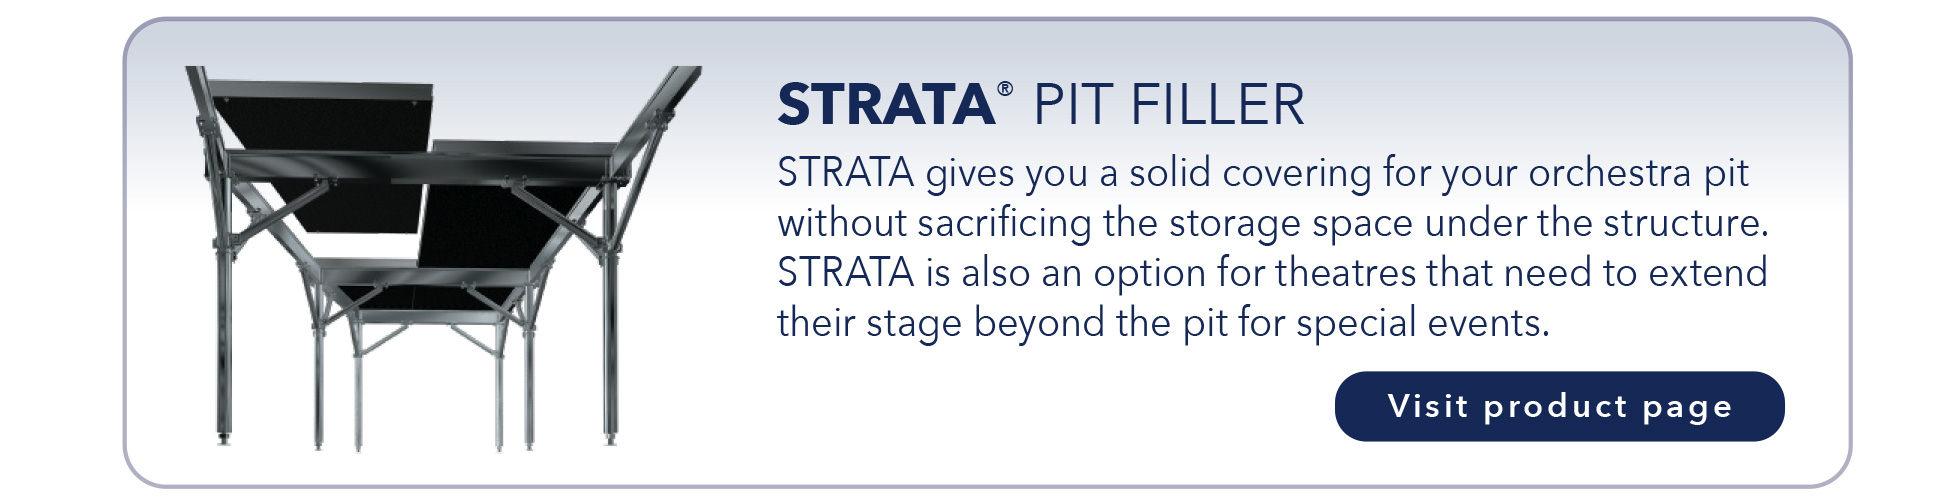 STRATA® PIT FILLER
STRATA gives you a solid covering for your orchestra pit
without sacrificing the storage space under the structure.
STRATA is also an option for theatres that need to extend
their stage beyond the pit for special events.